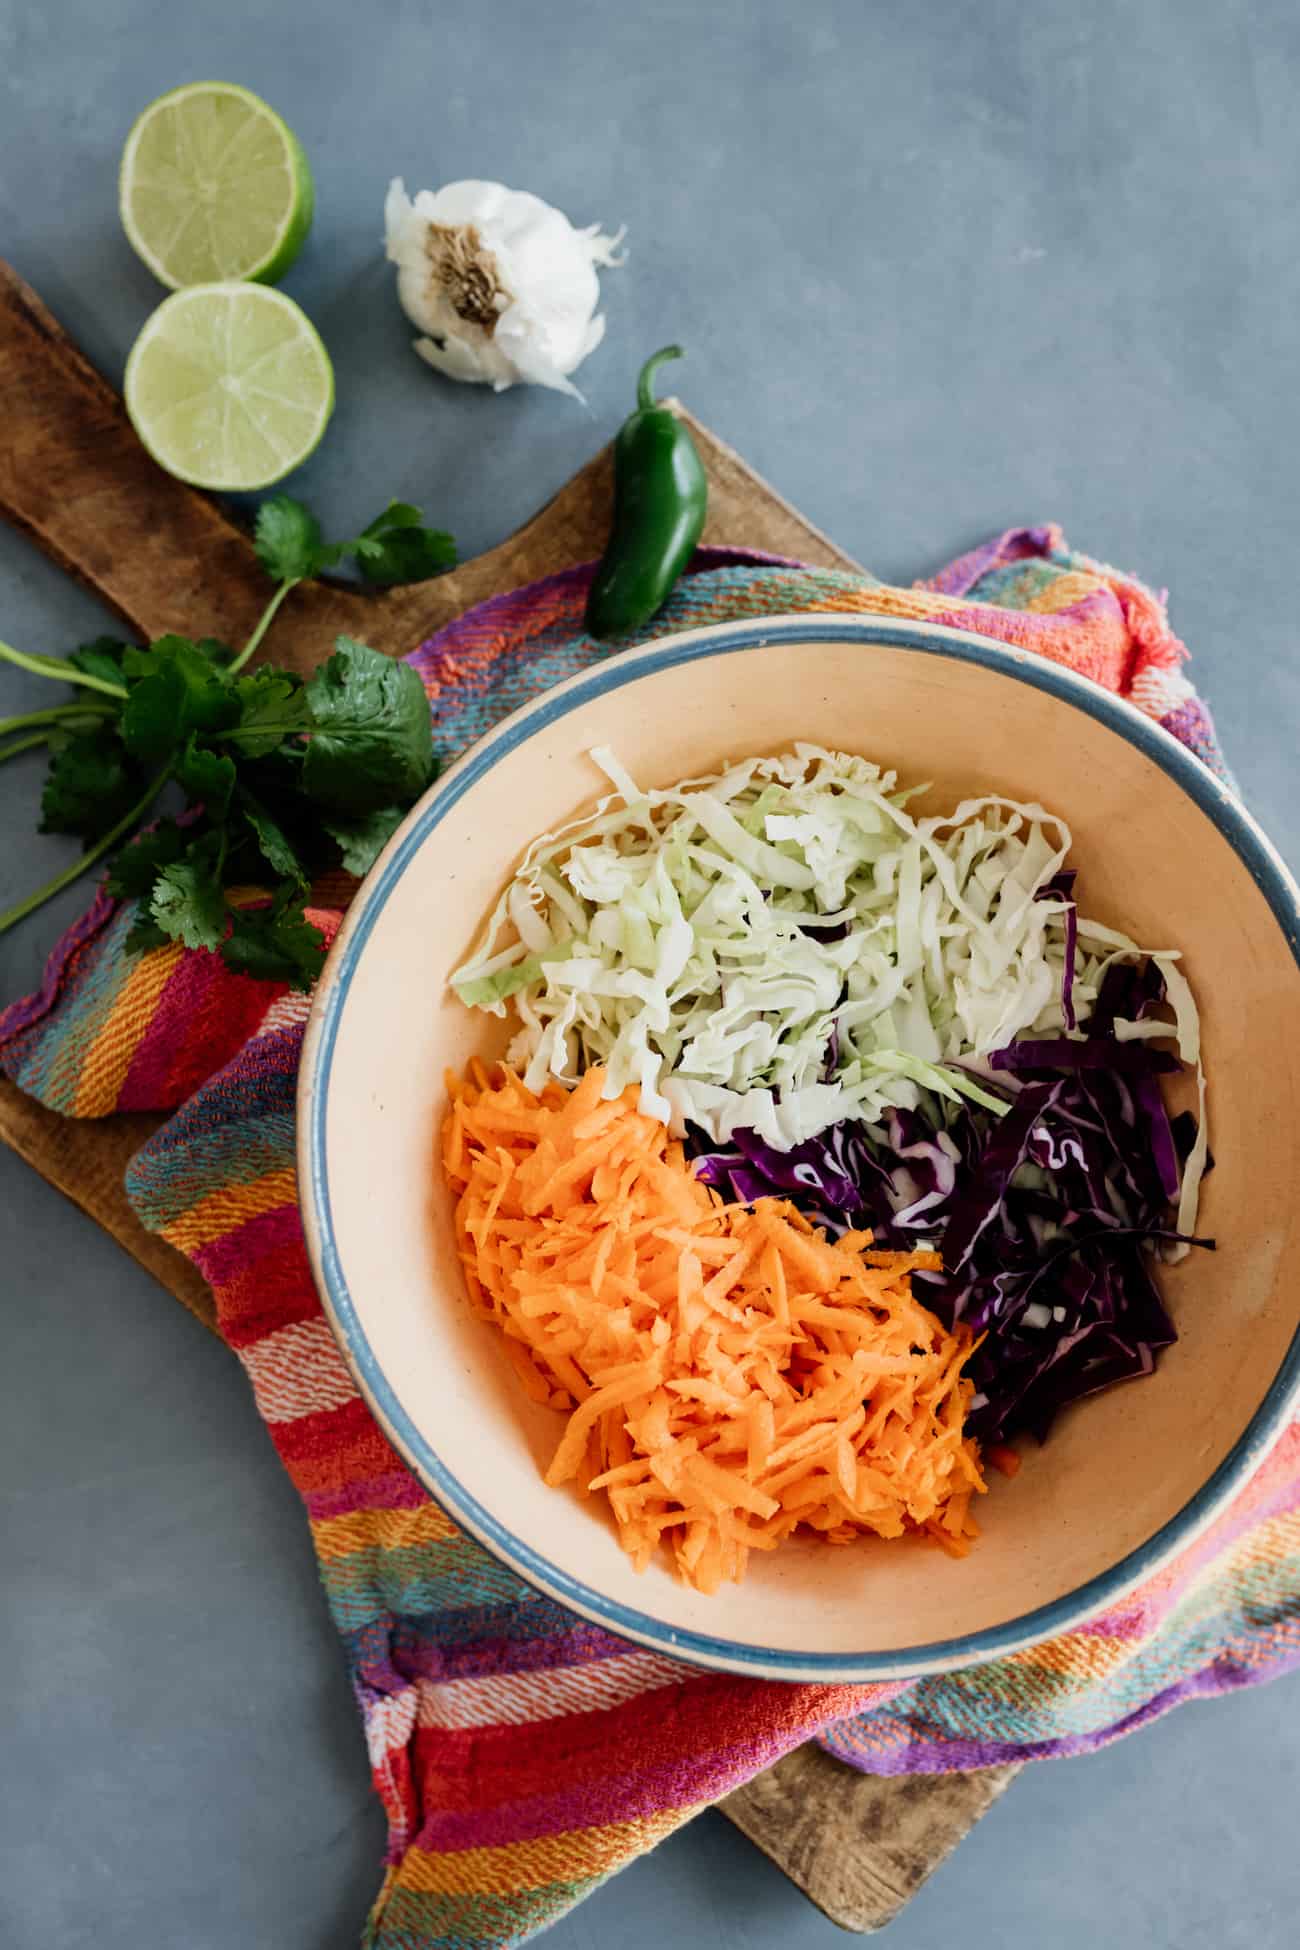 shredded green and purple cabbage and grated carrots in a bowl for making cole slaw.